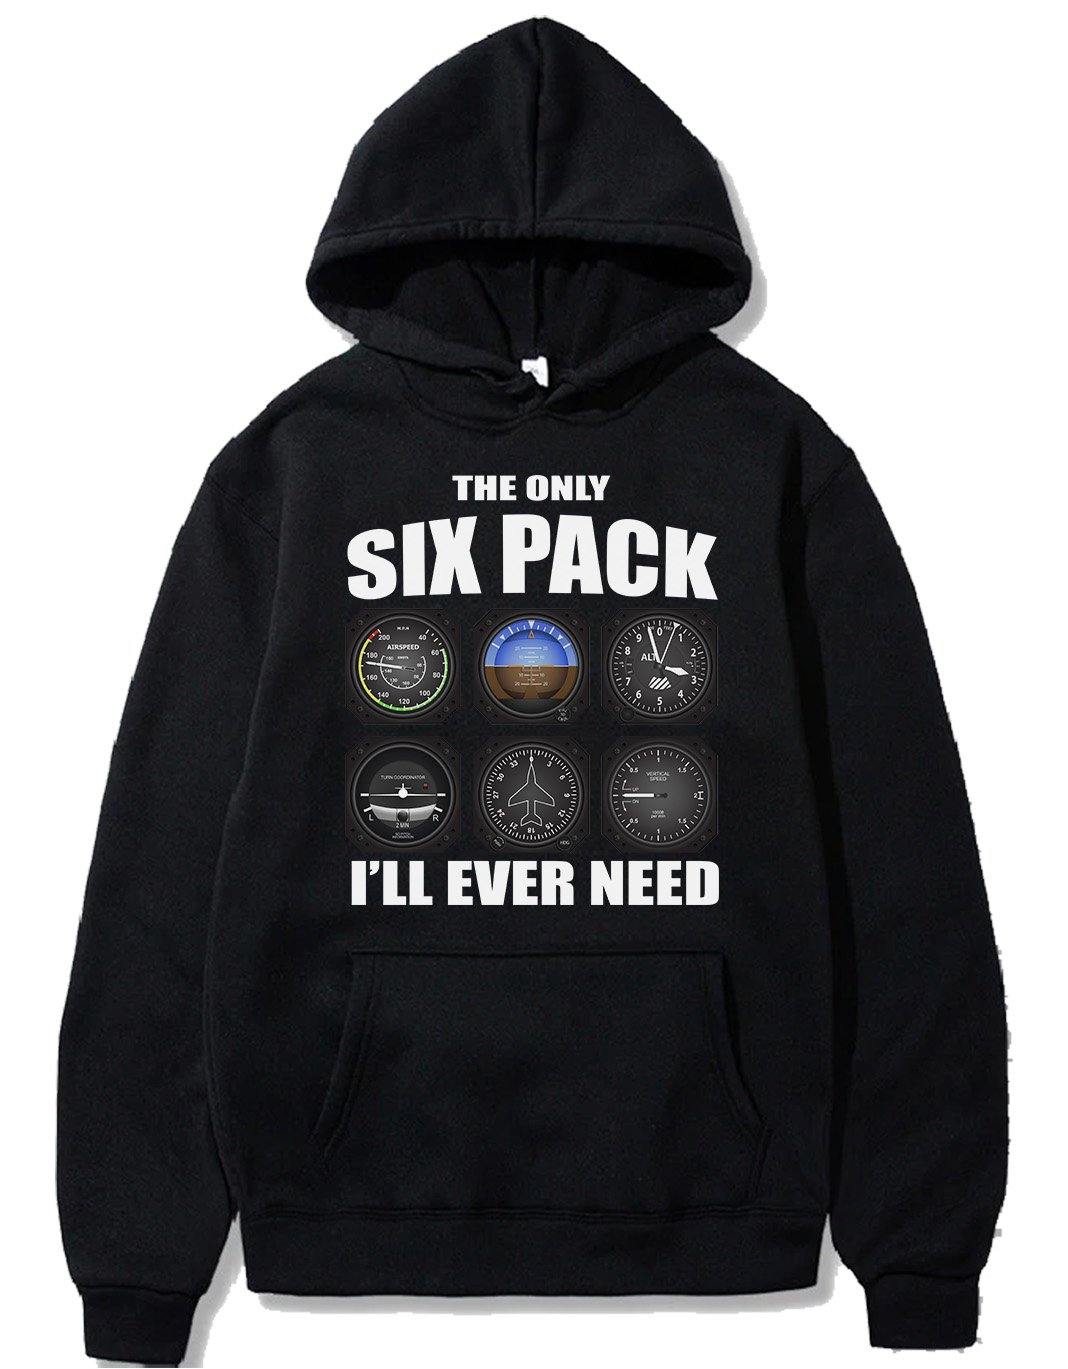 THE ONLY SIX PACK I'LL EVER NEED PULLOVER THE AV8R